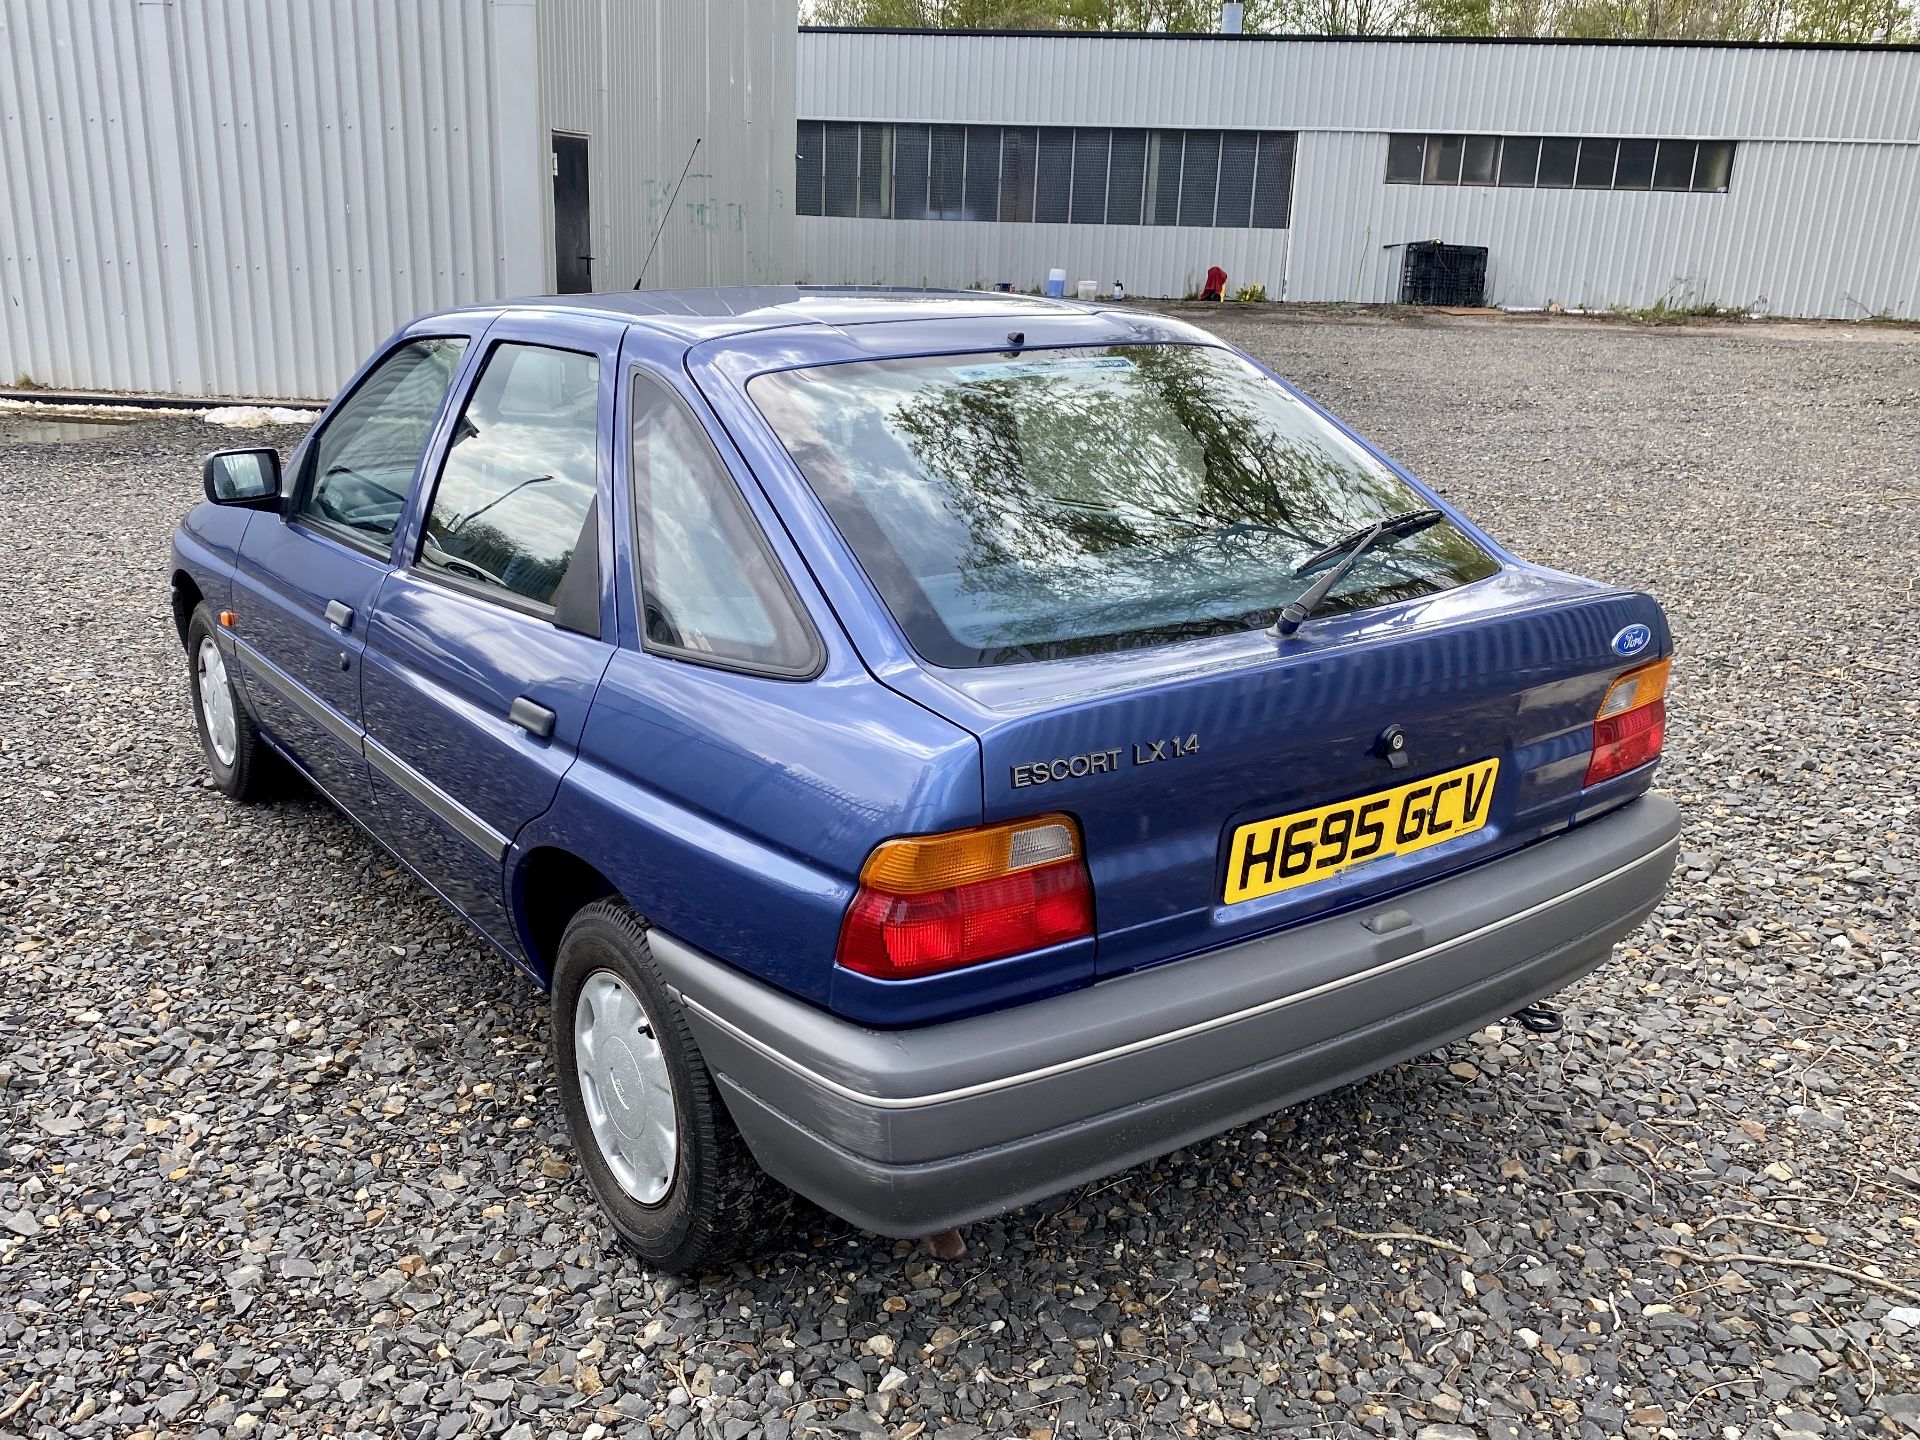 Ford Escort LX1.4 - Image 13 of 54